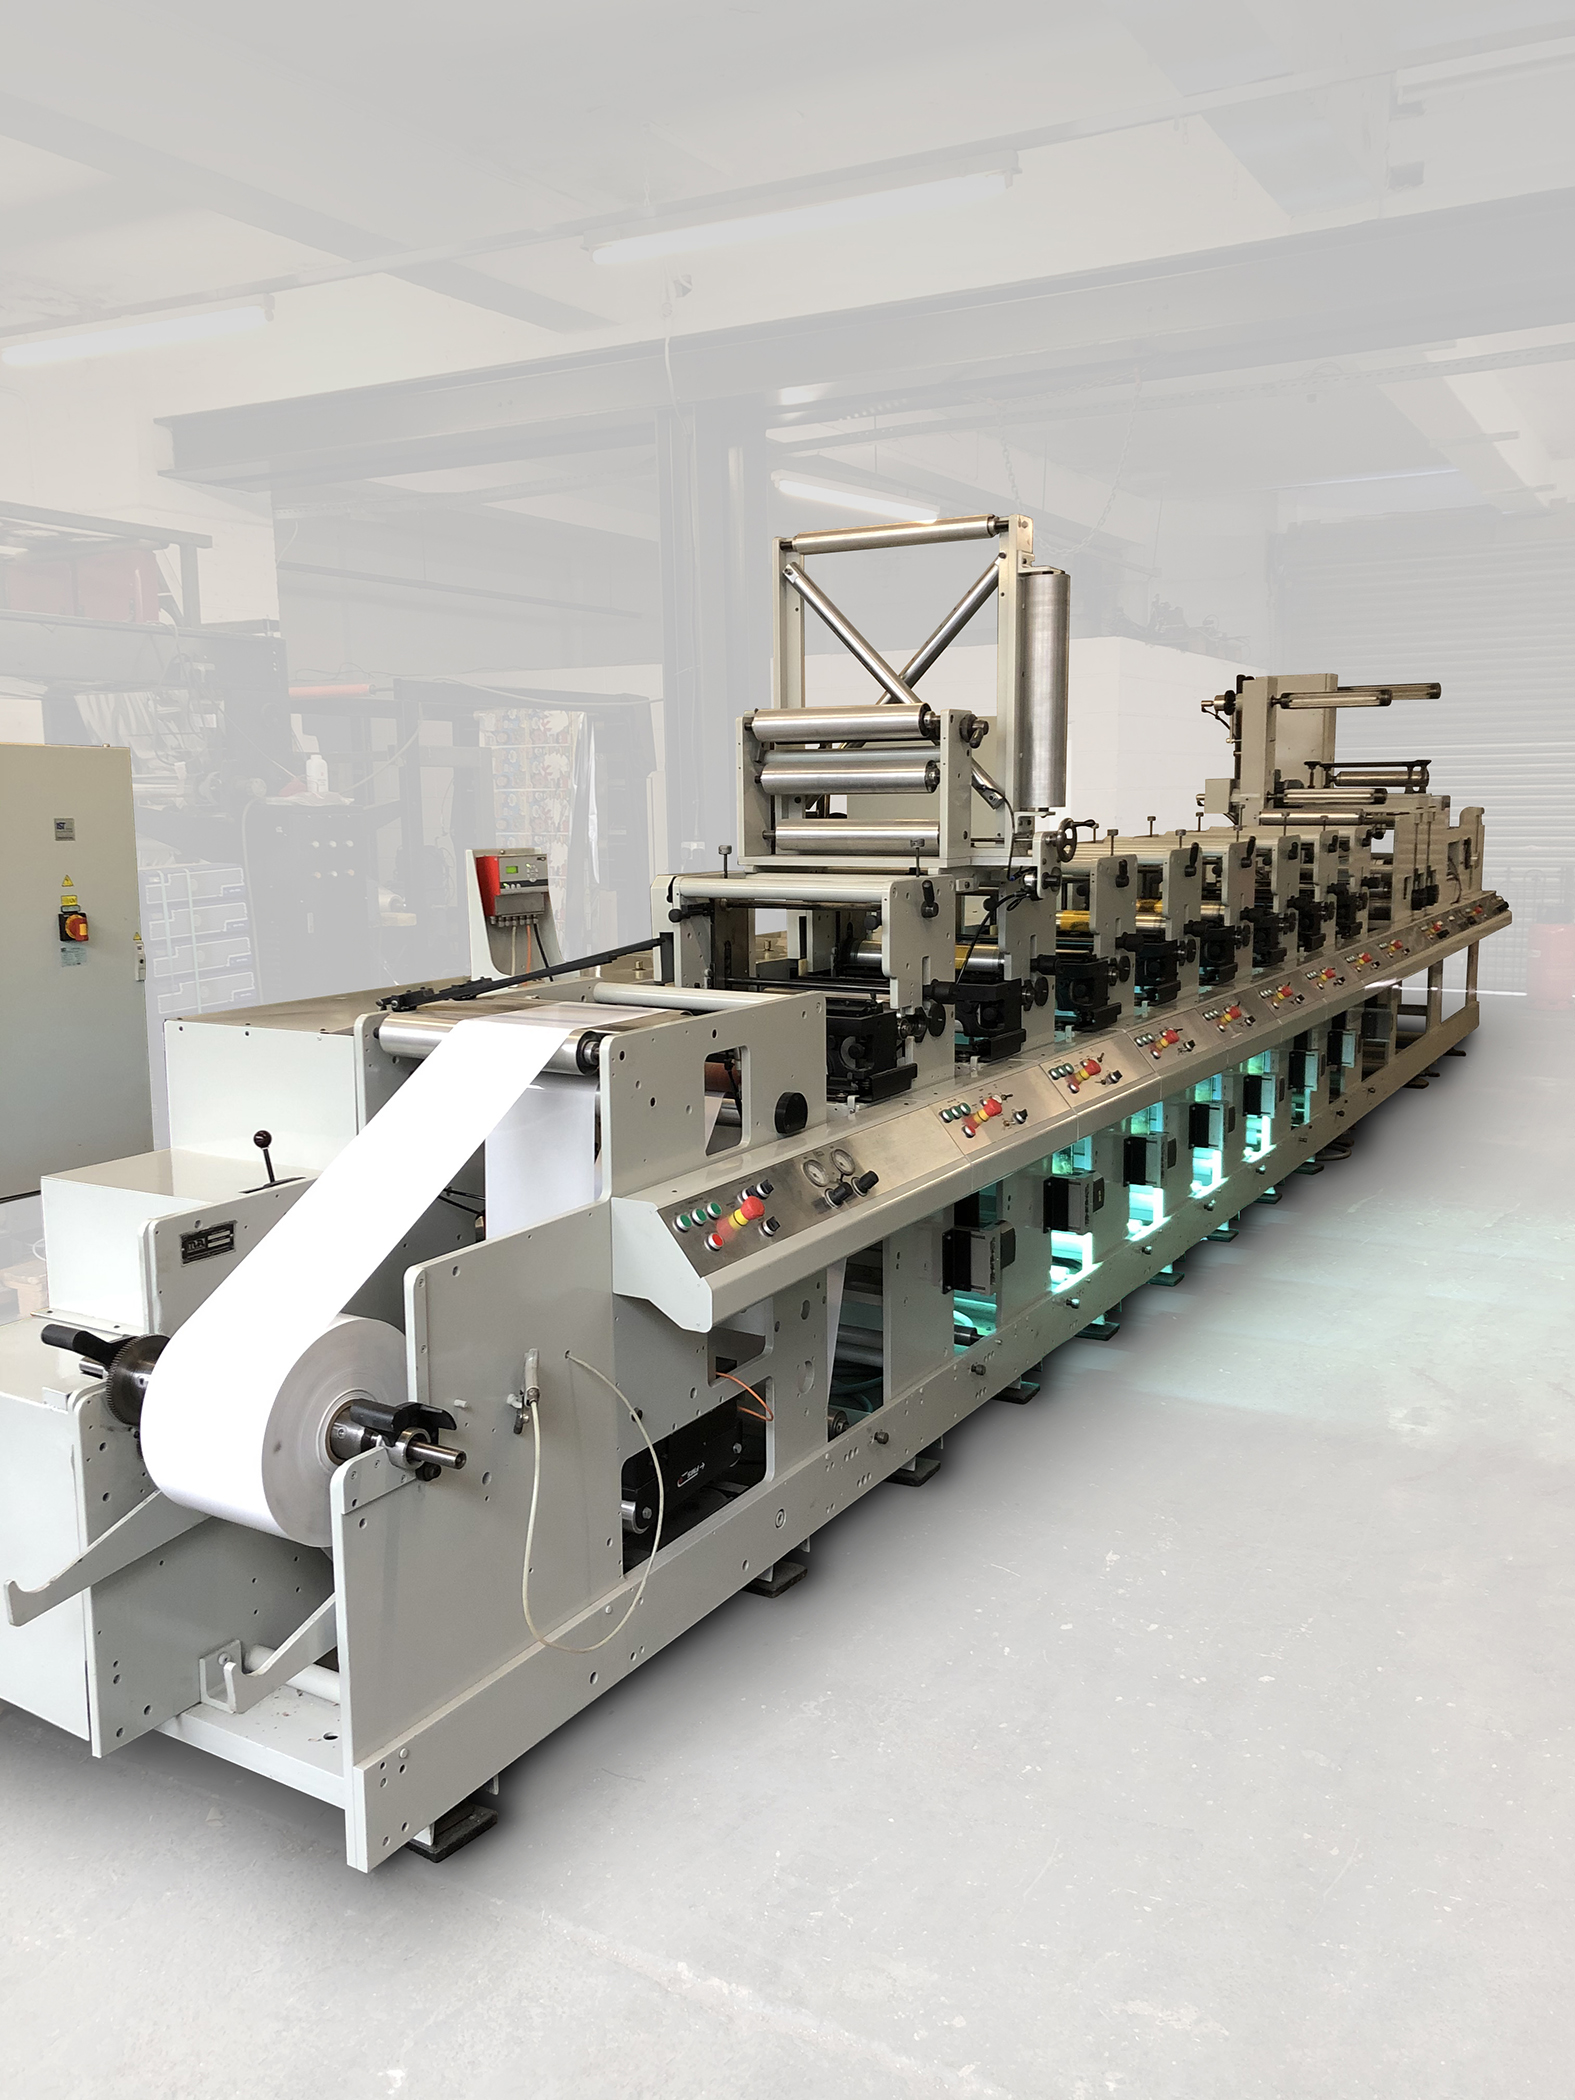 Mitsubishi Electric has helped JK Machinery Ltd upgrade the design of an automated printing machine to deliver an enhanced, futureproof and cost-effective solution to its customers. [Source: Mitsubishi Electric Europe B.V., JK Machinery Ltd]